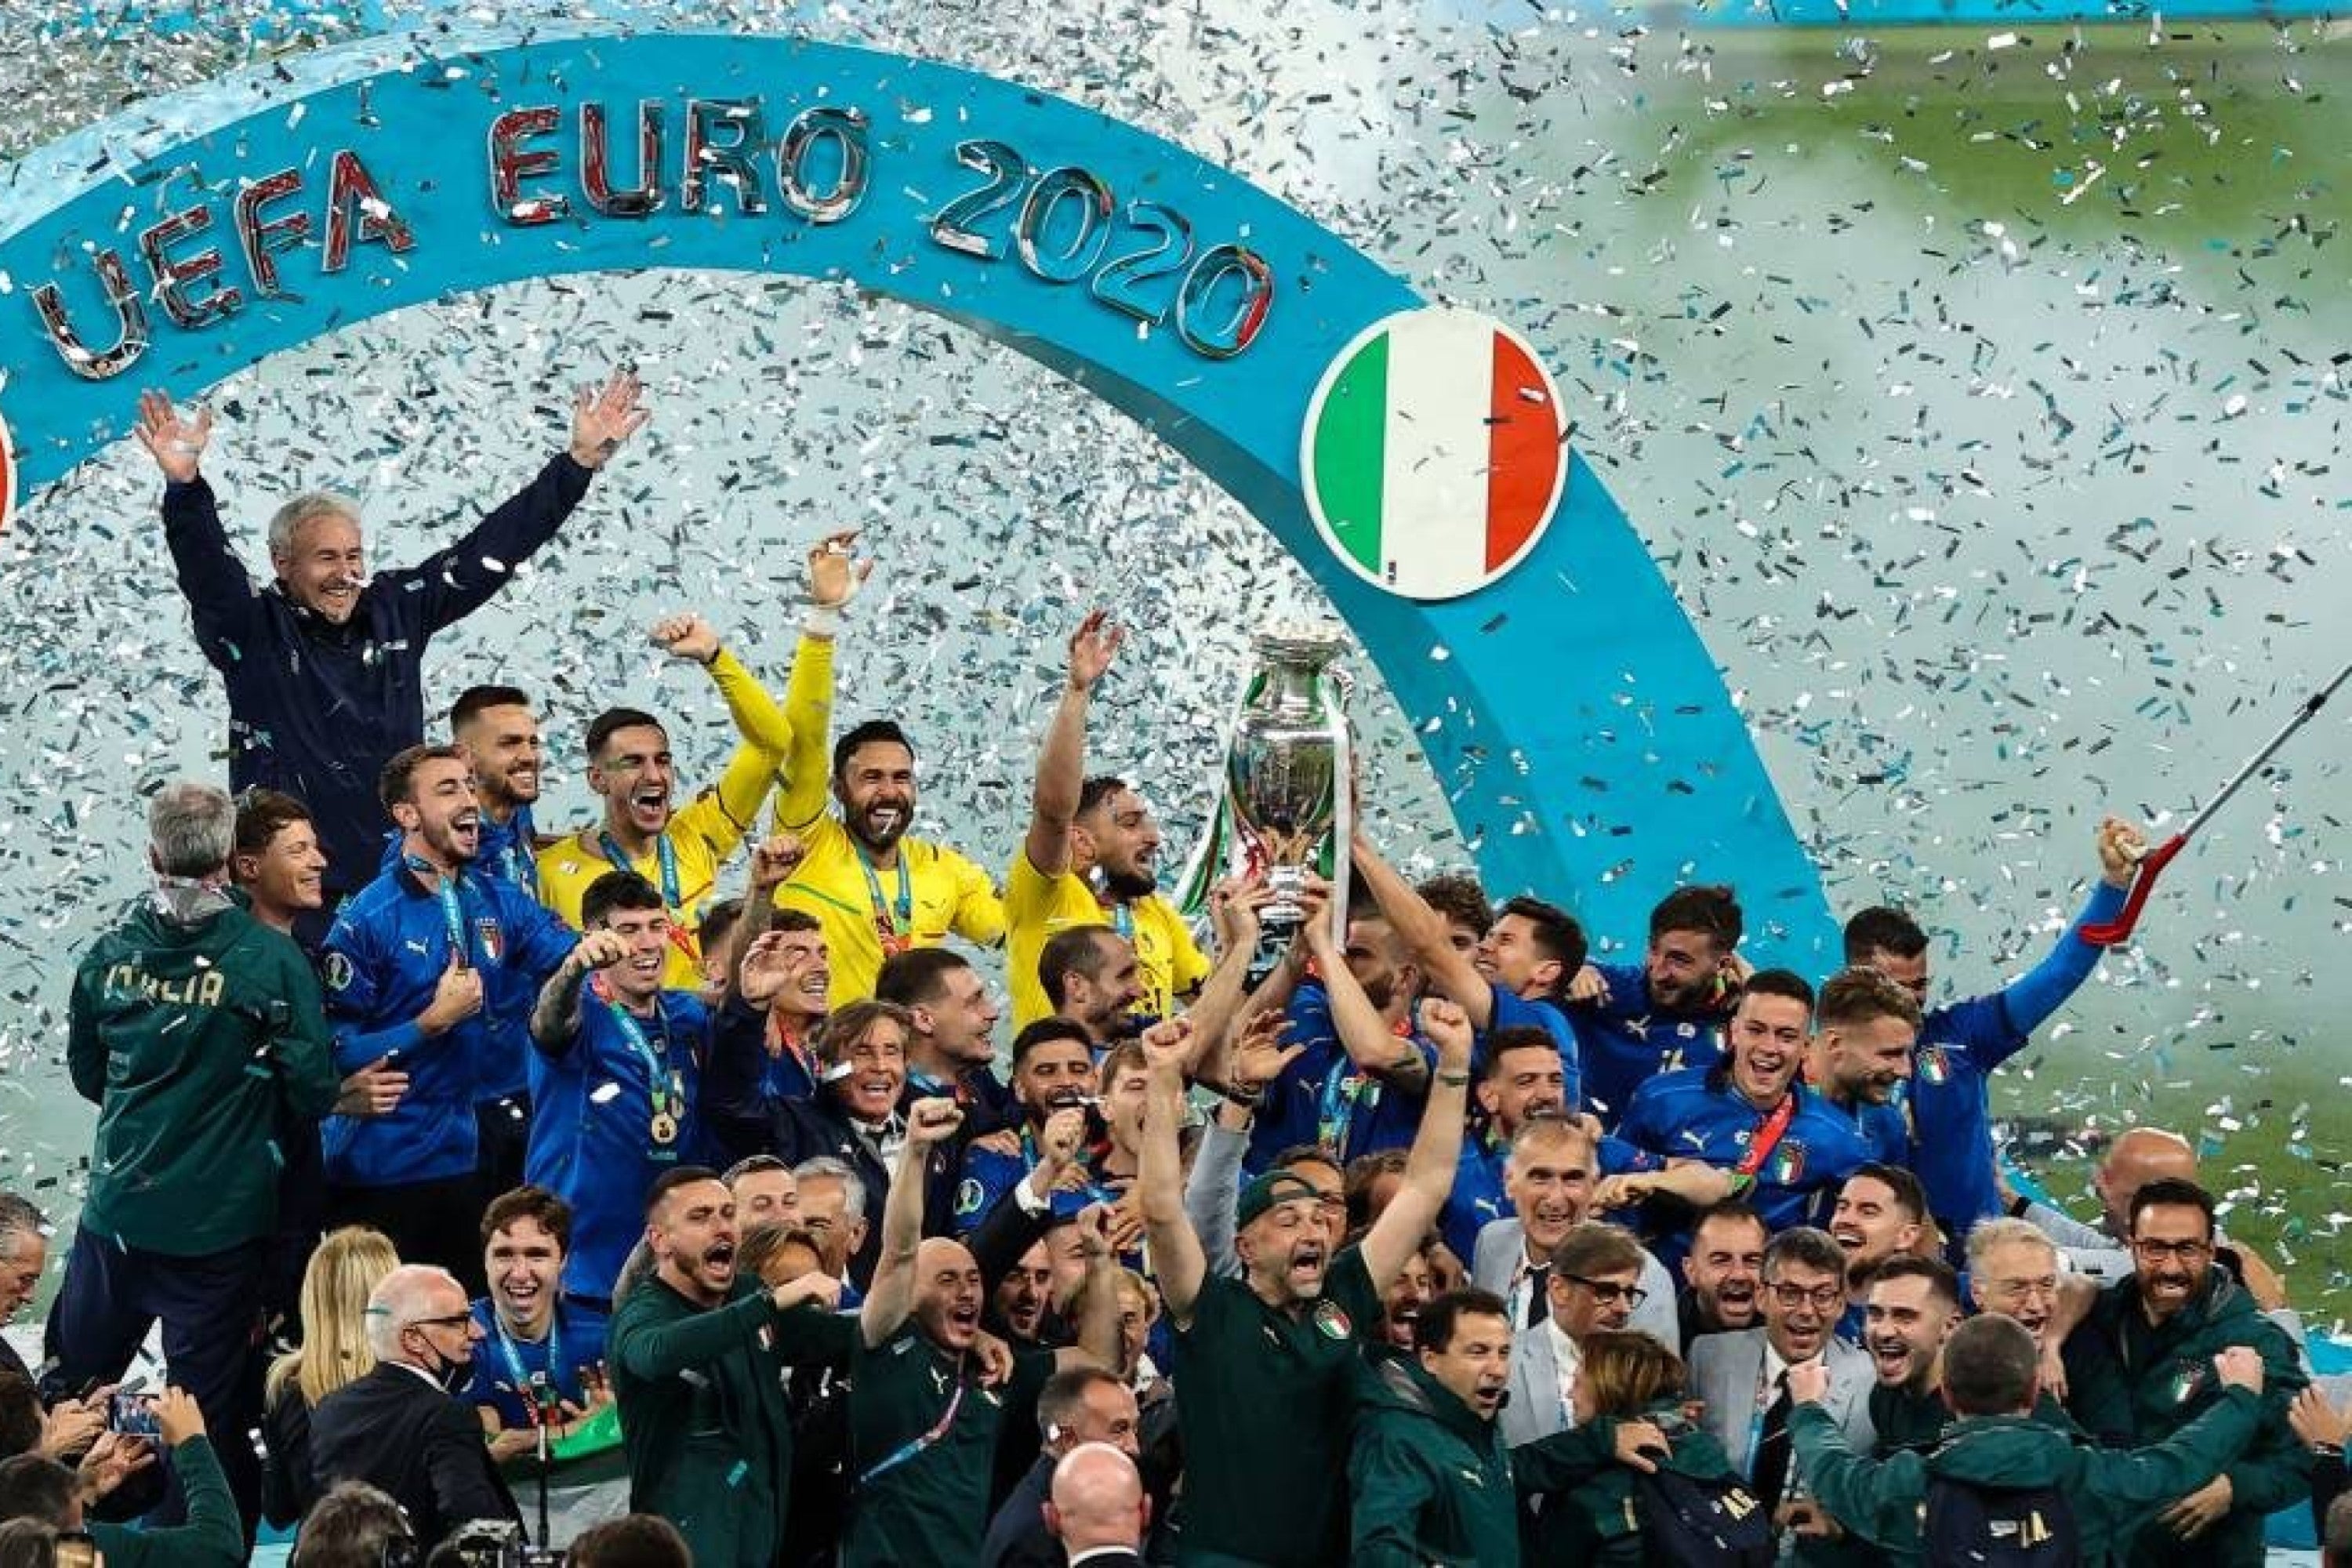 Italy are crowned European Champions in London